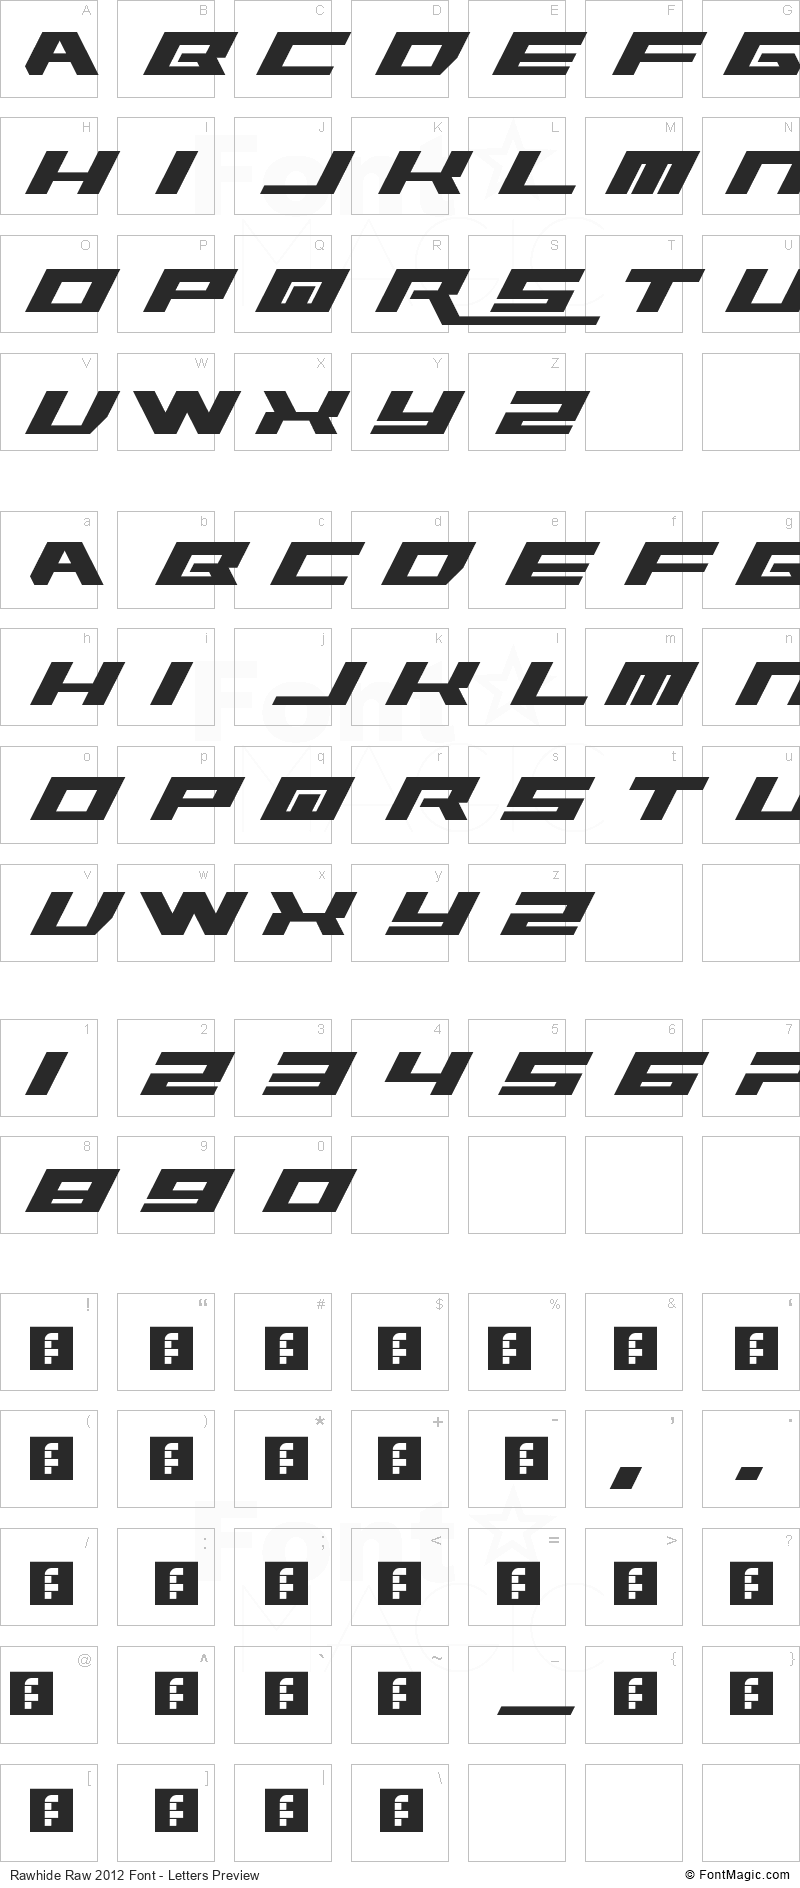 Rawhide Raw 2012 Font - All Latters Preview Chart